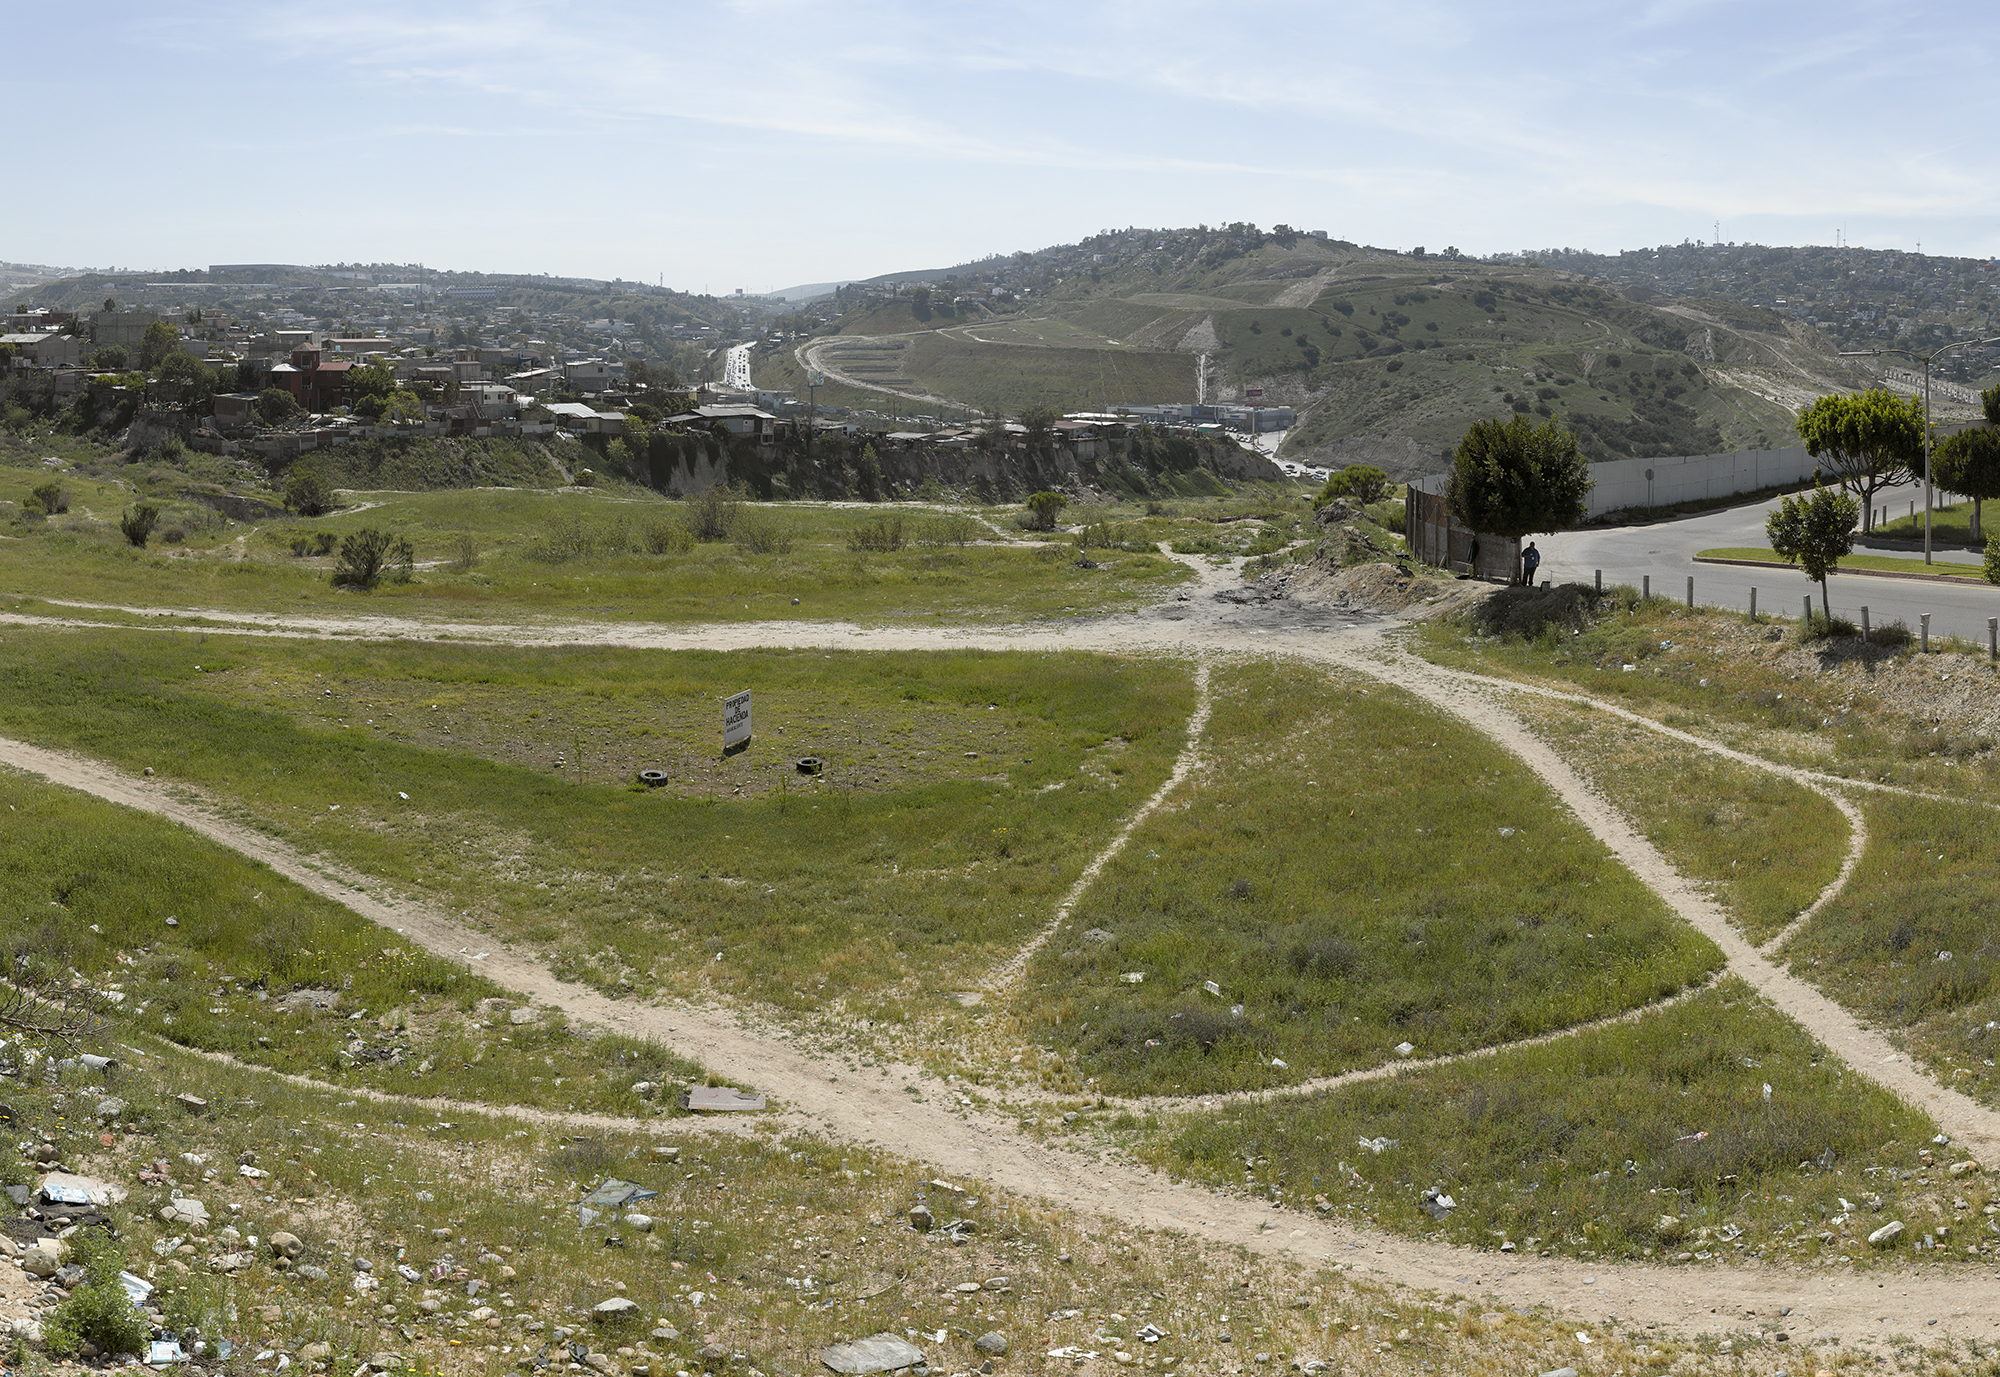 Tijuana residents have worn paths through a vacant patch of grass in this border city. (David Taylor) 